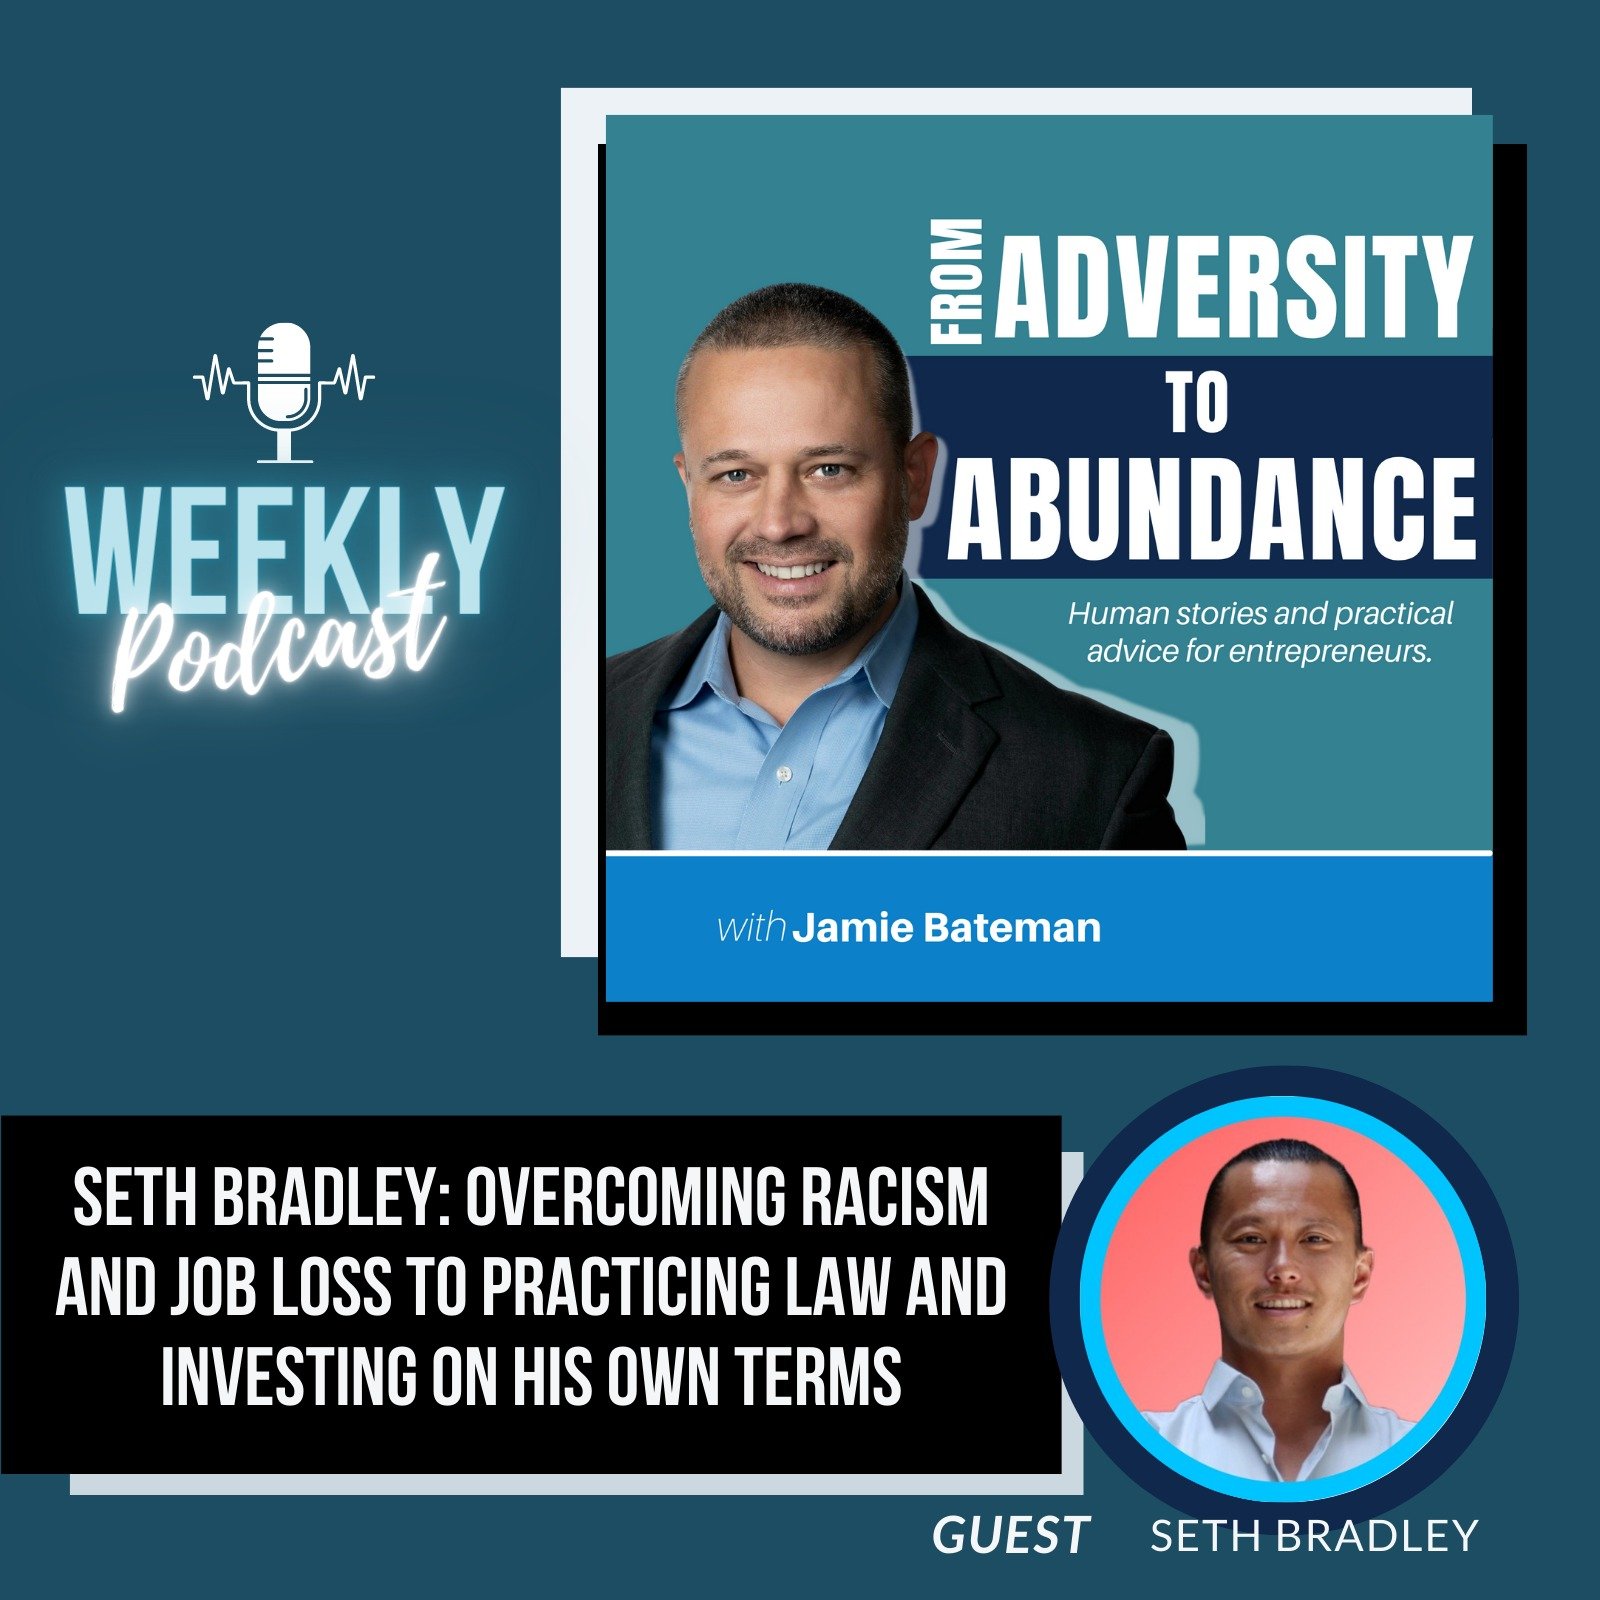 Seth Bradley: Overcoming Racism and Job Loss to Practicing Law and Investing on His Own Terms